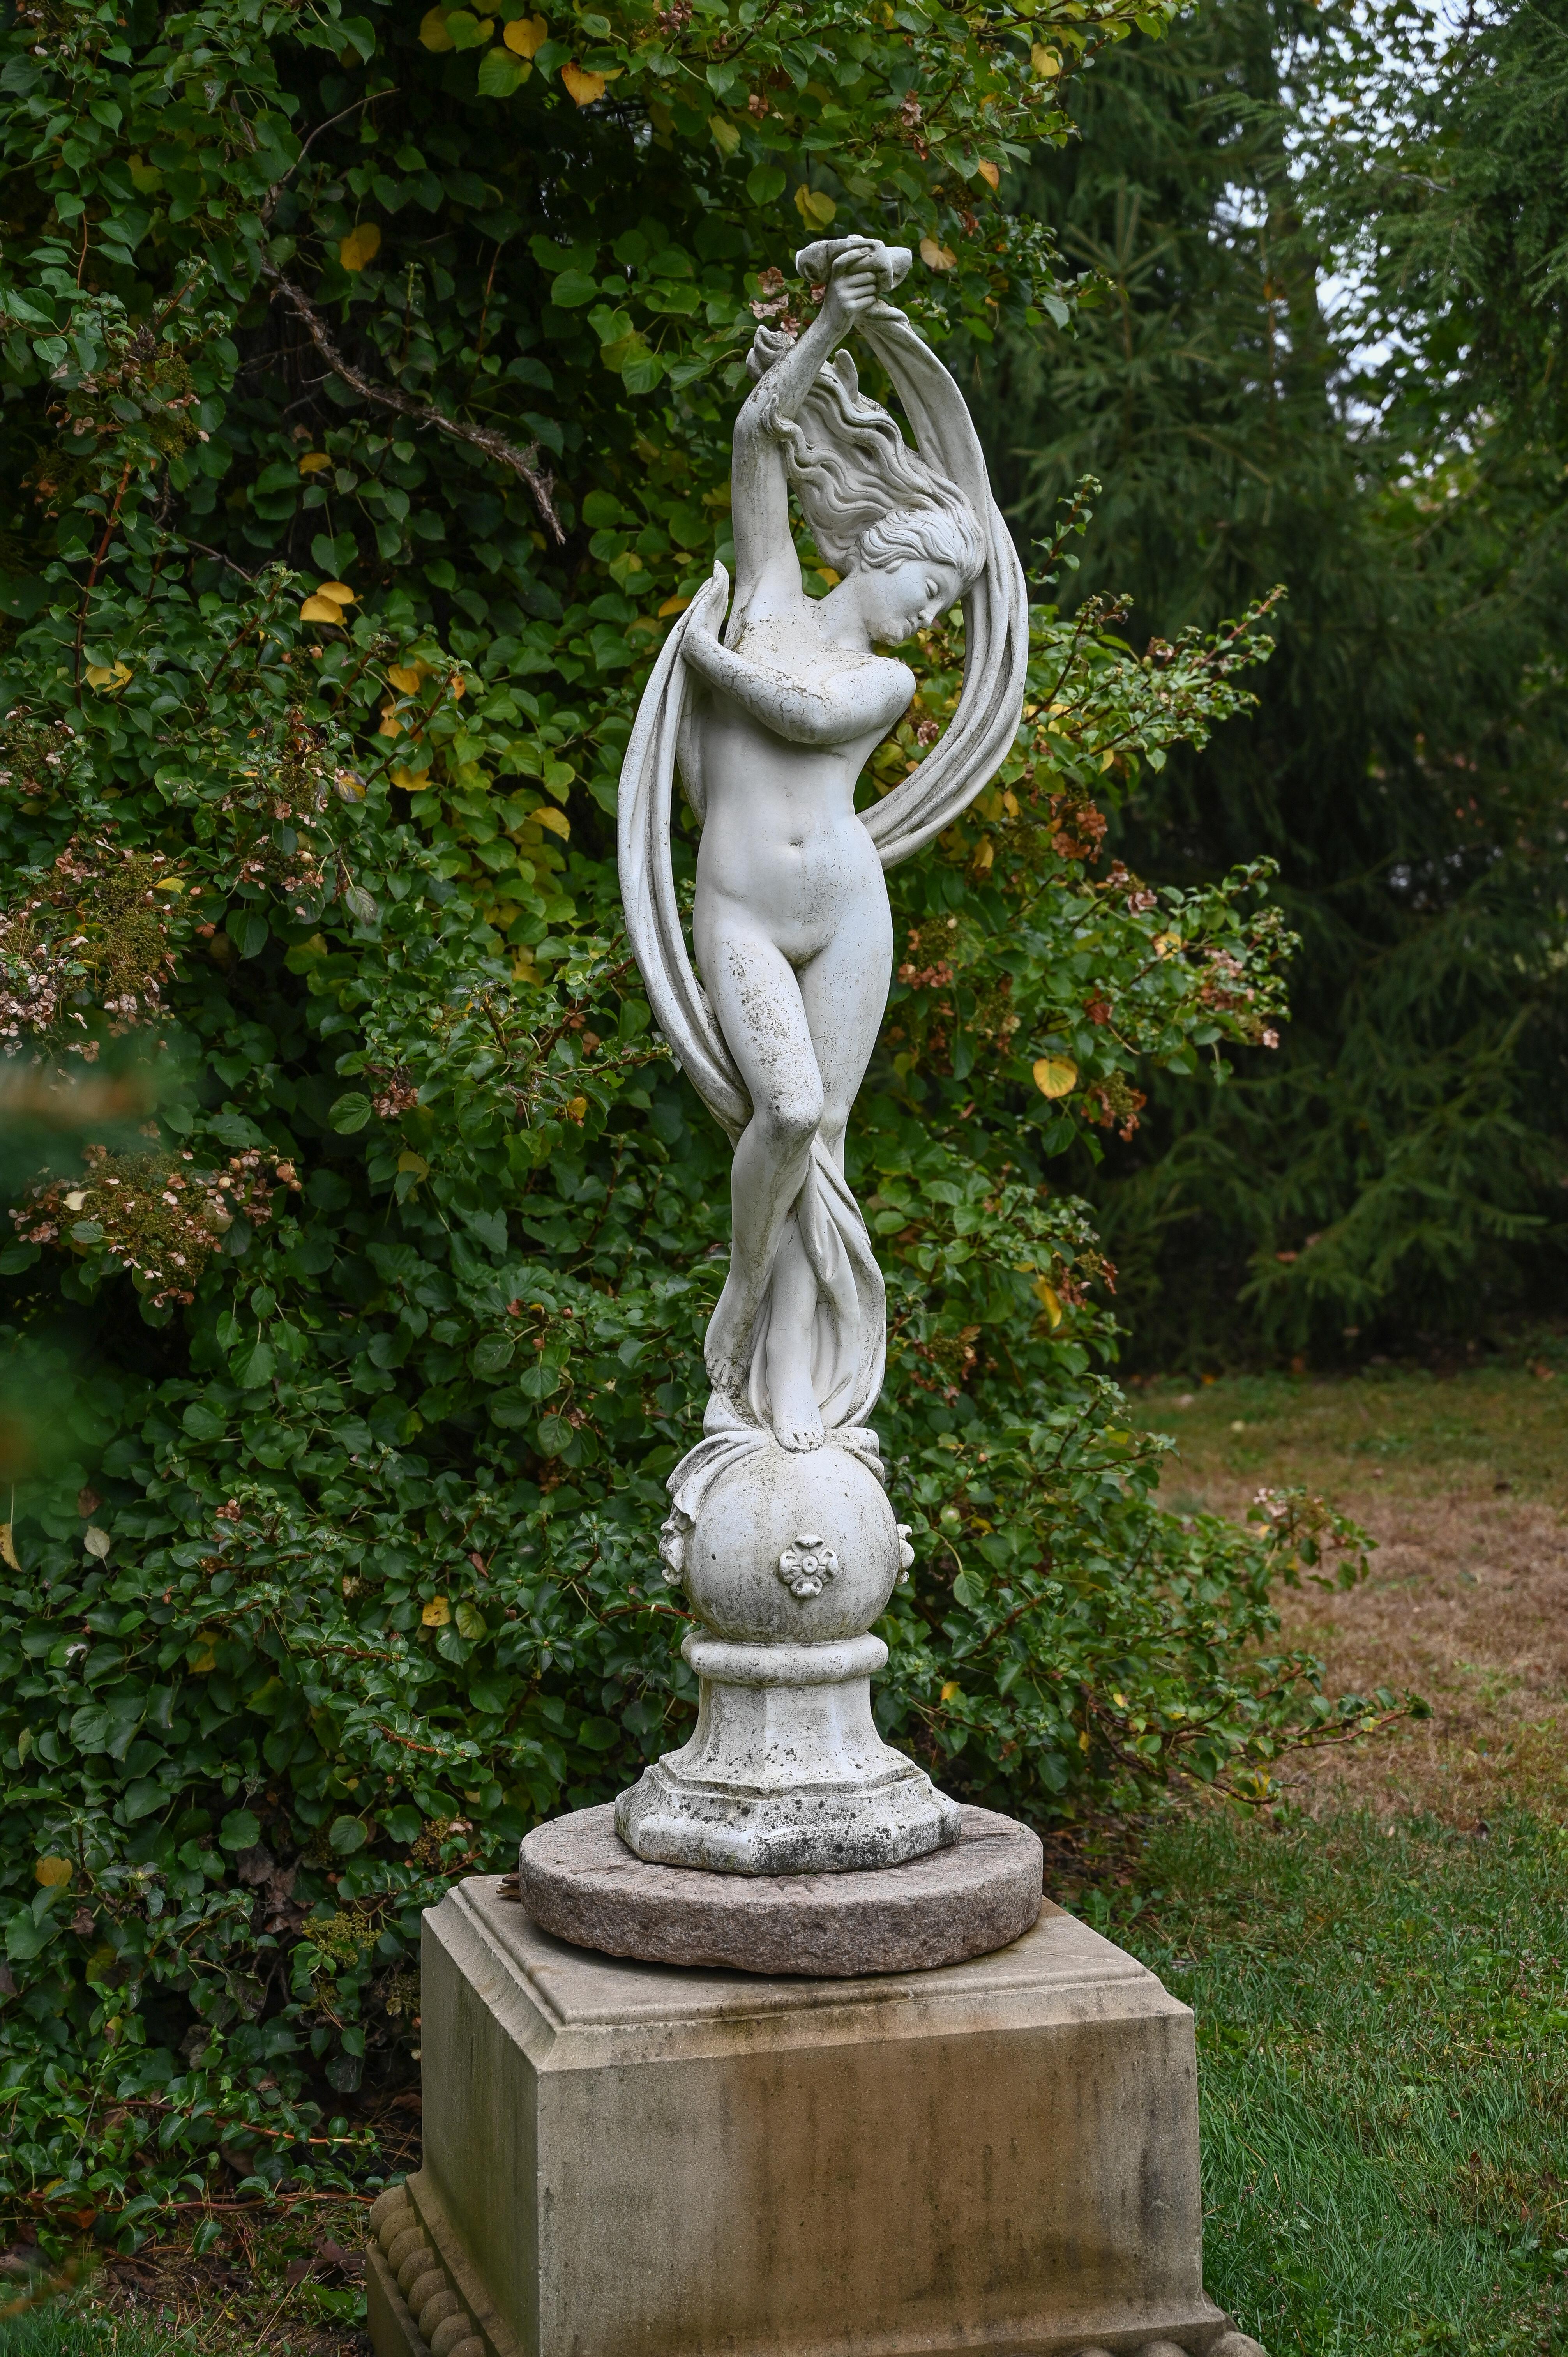 A composition stone figure of a maiden with upswept hair and a long flowing ribbon of fabric, the maiden standing on a sphere raised on octagonal base, Italian, circa 1960. Marked “PAPINI A” for the Papini (Agostino SNC) company in the Rignano